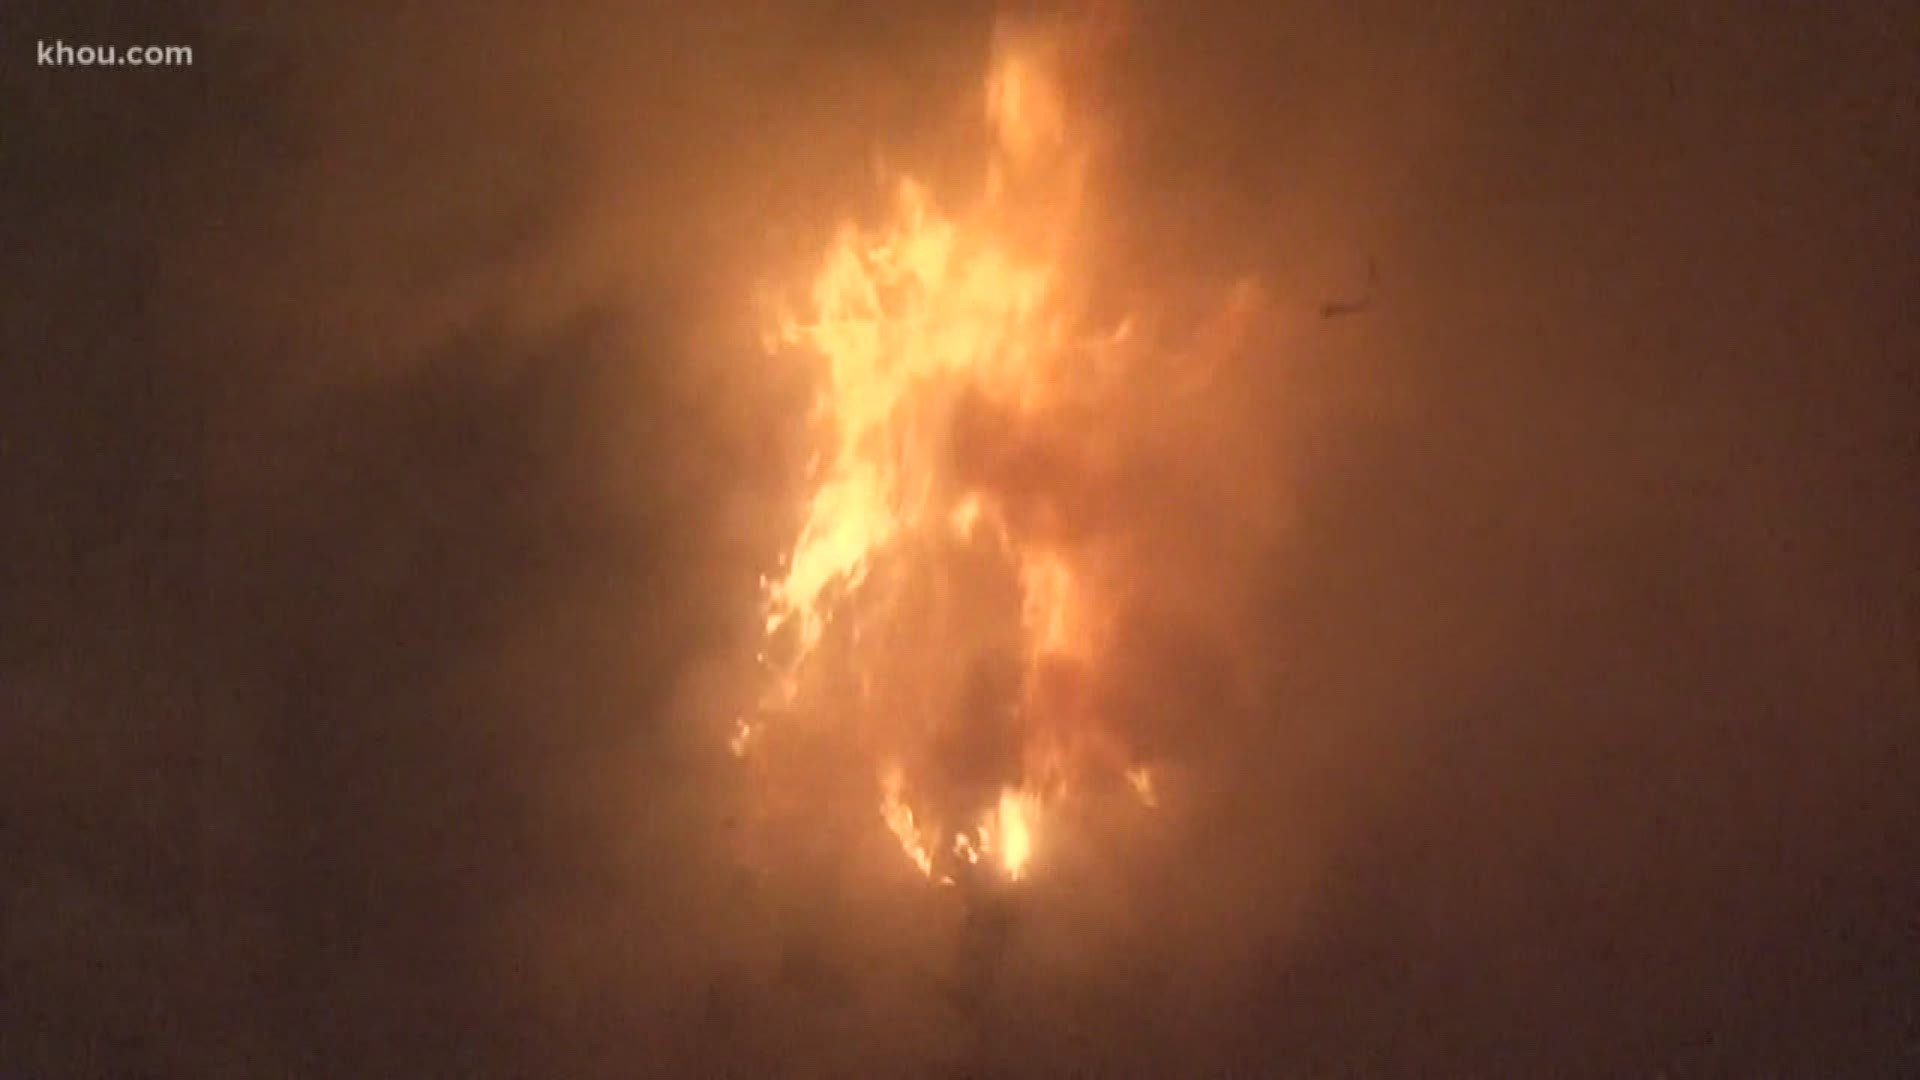 Flames ripped through an apartment building's front office in east Houston overnight.